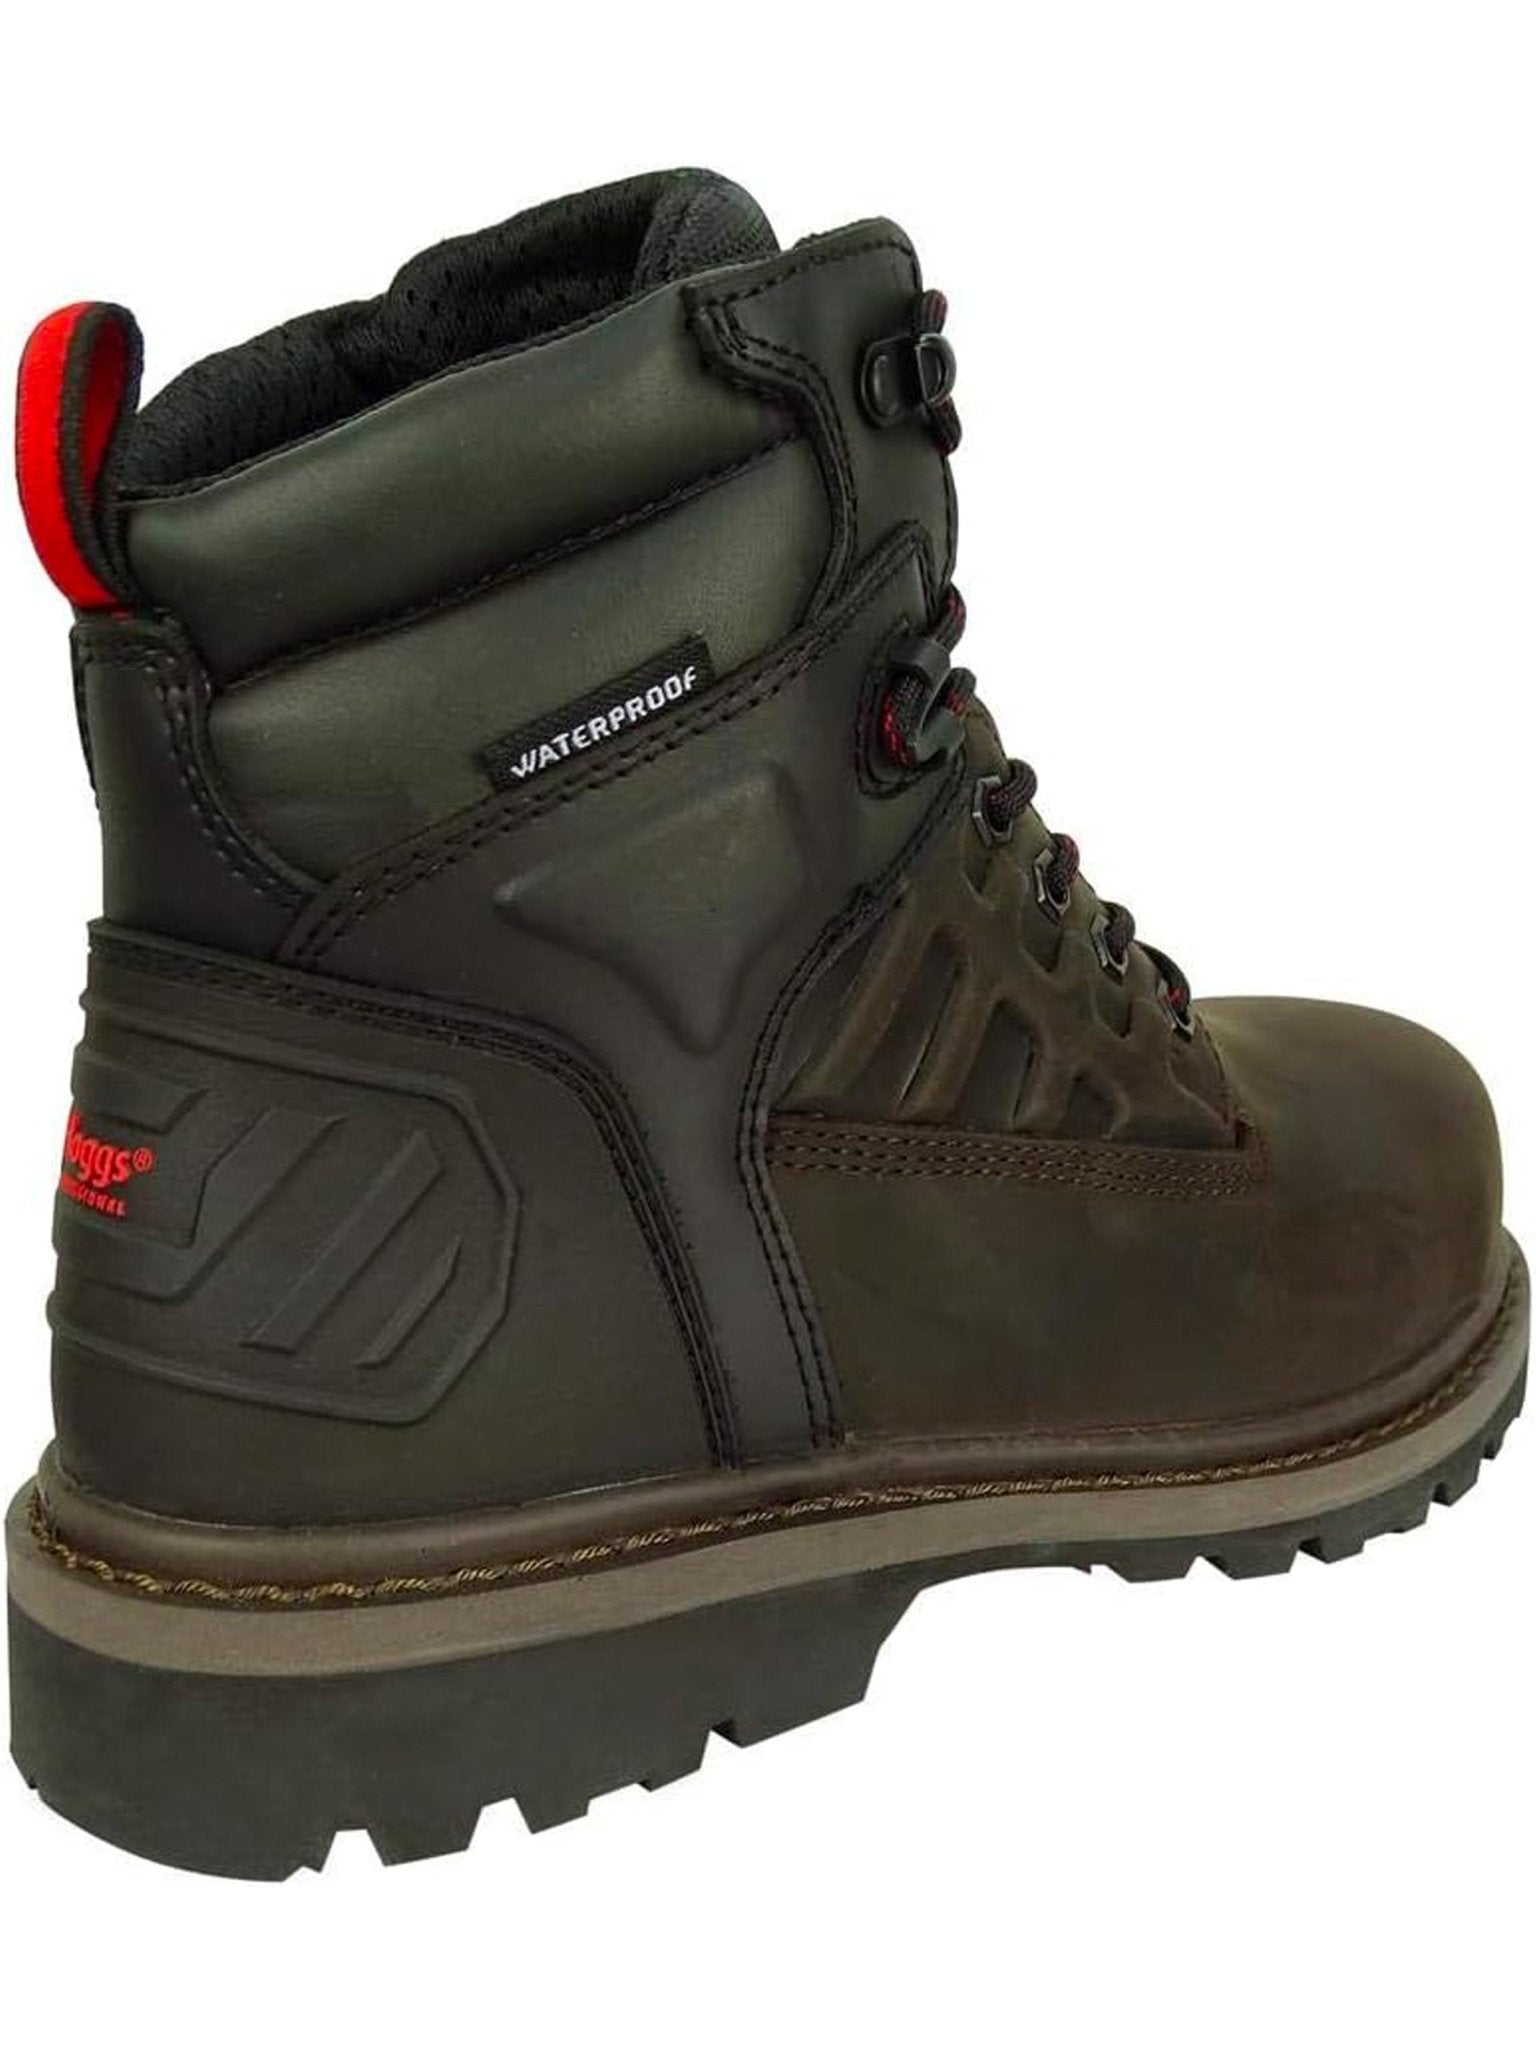 4elementsclothingHoggs of FifeHoggs of Fife - Hercules Safety Lace up Boots - Steel Toe Cap bootsSafety FootwearHERC/CH/40